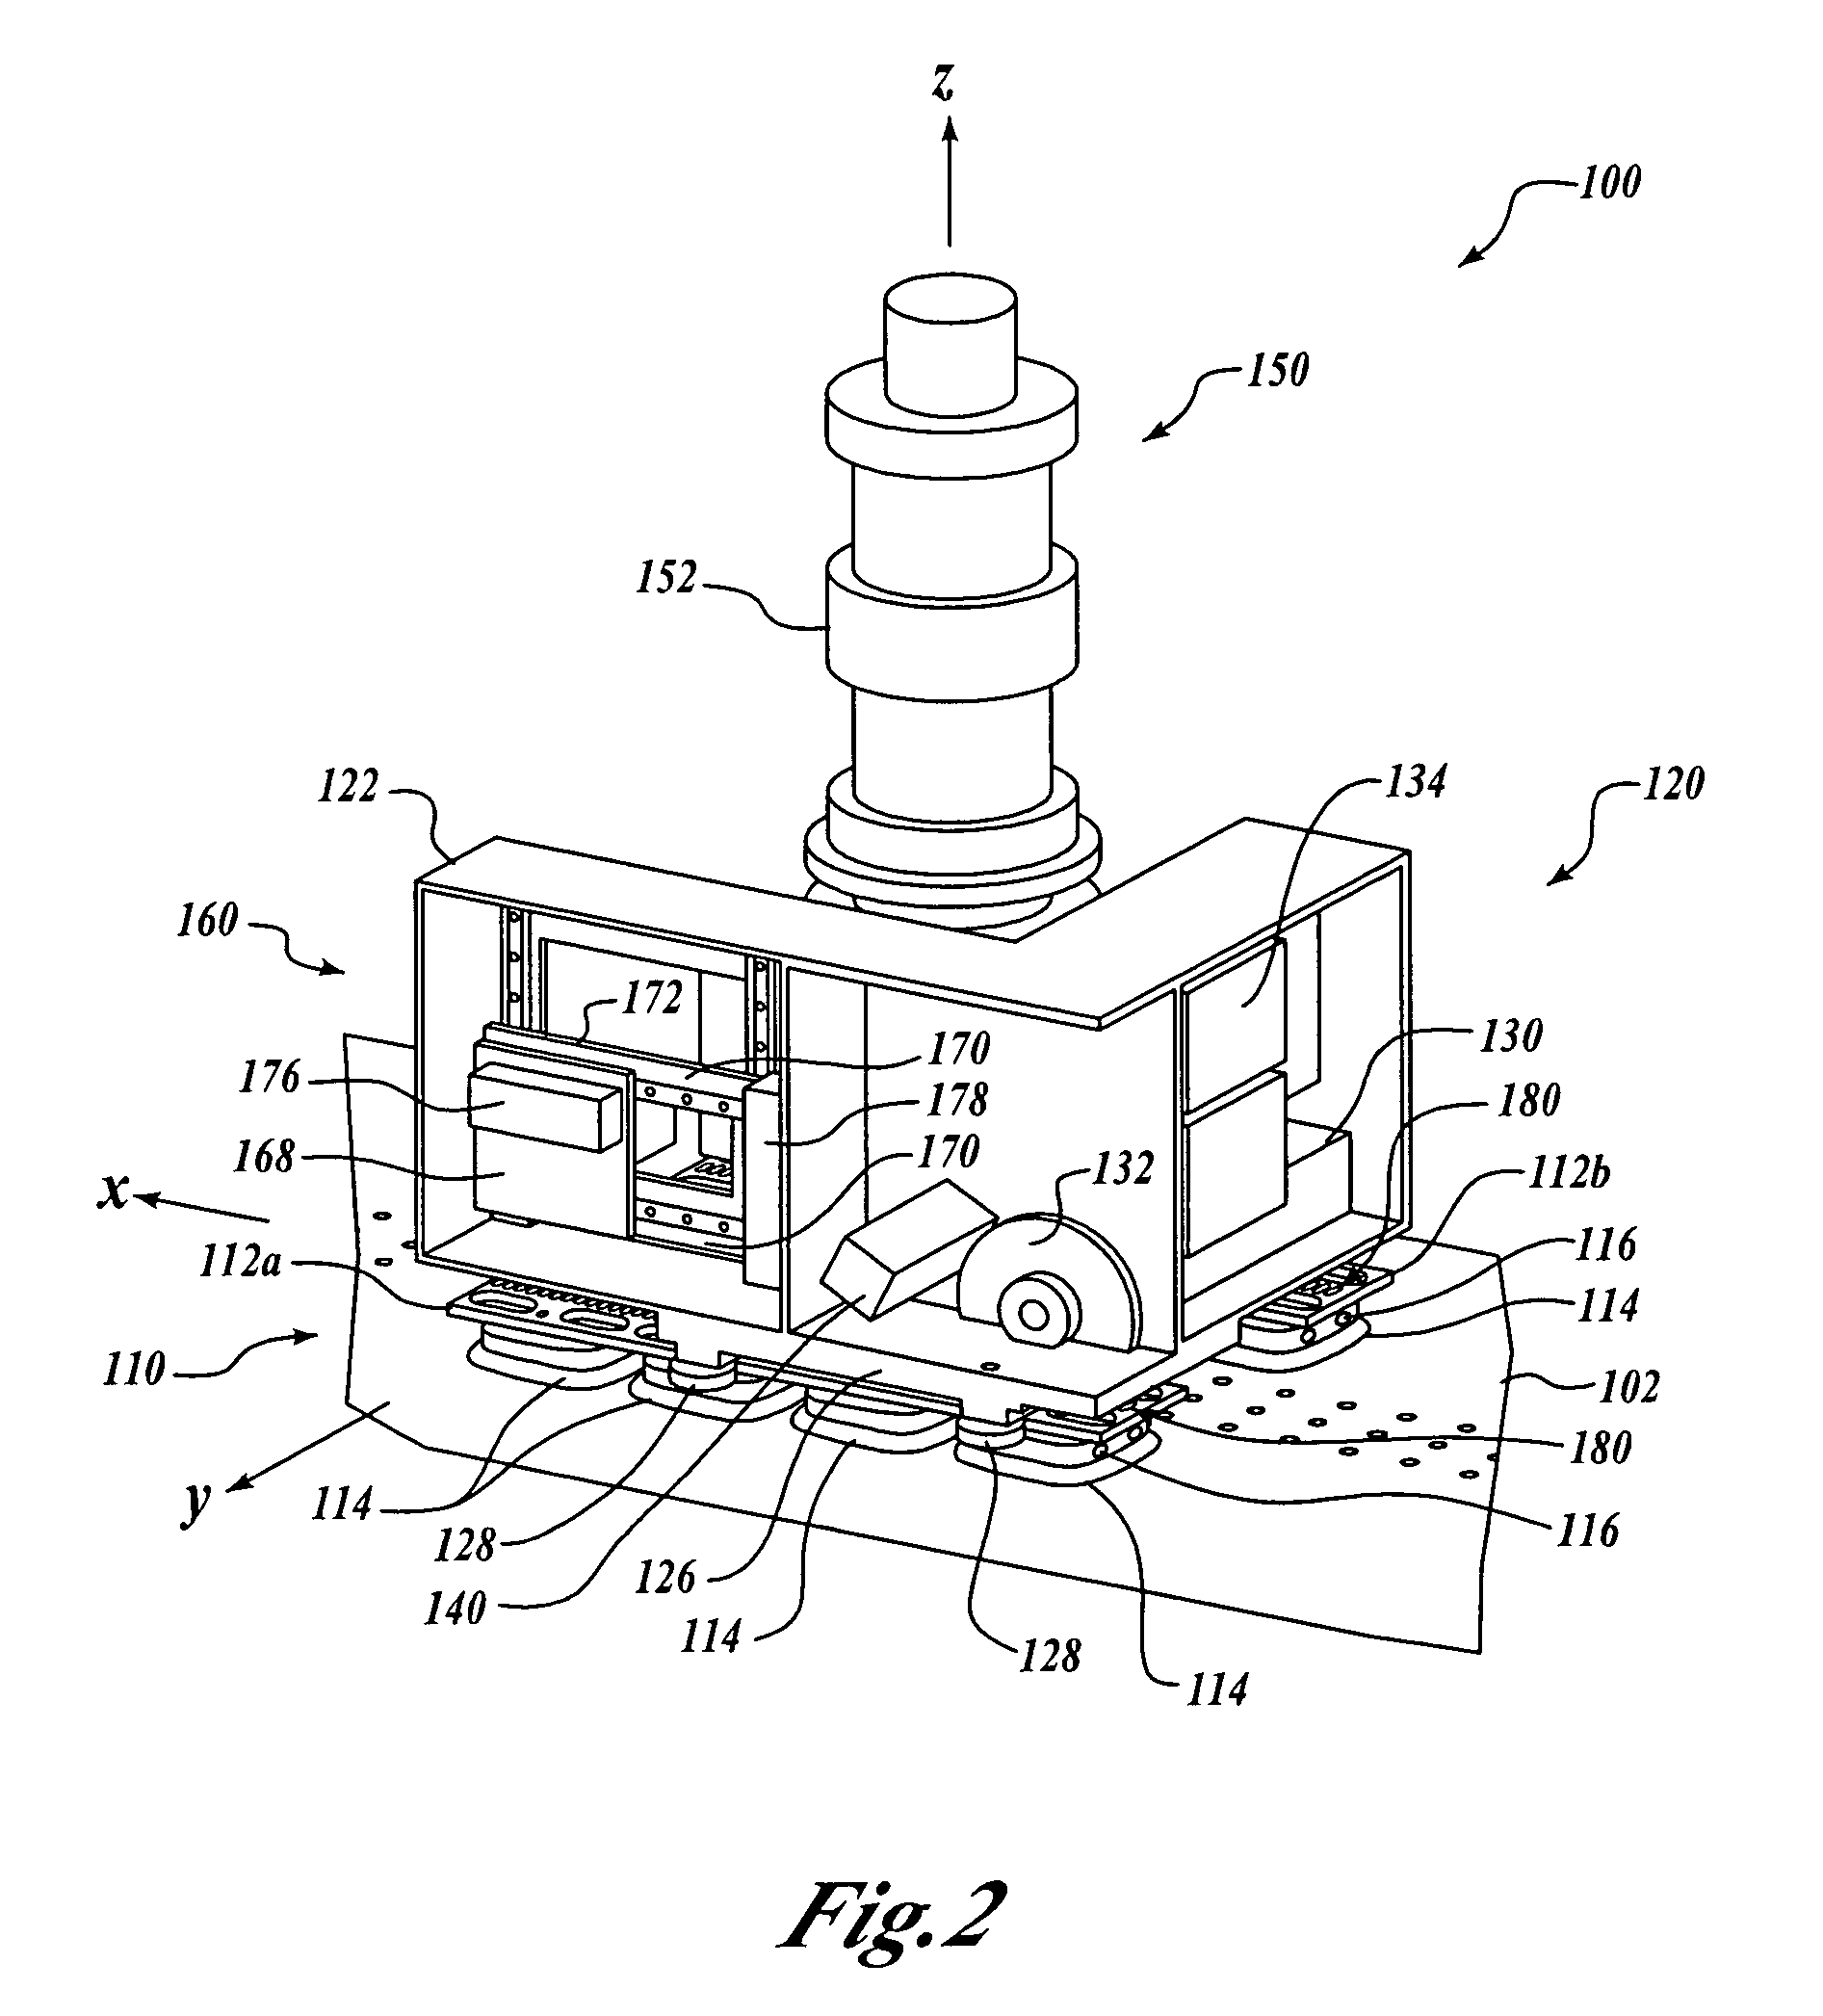 Methods and apparatus for track members having a neutral-axis rack